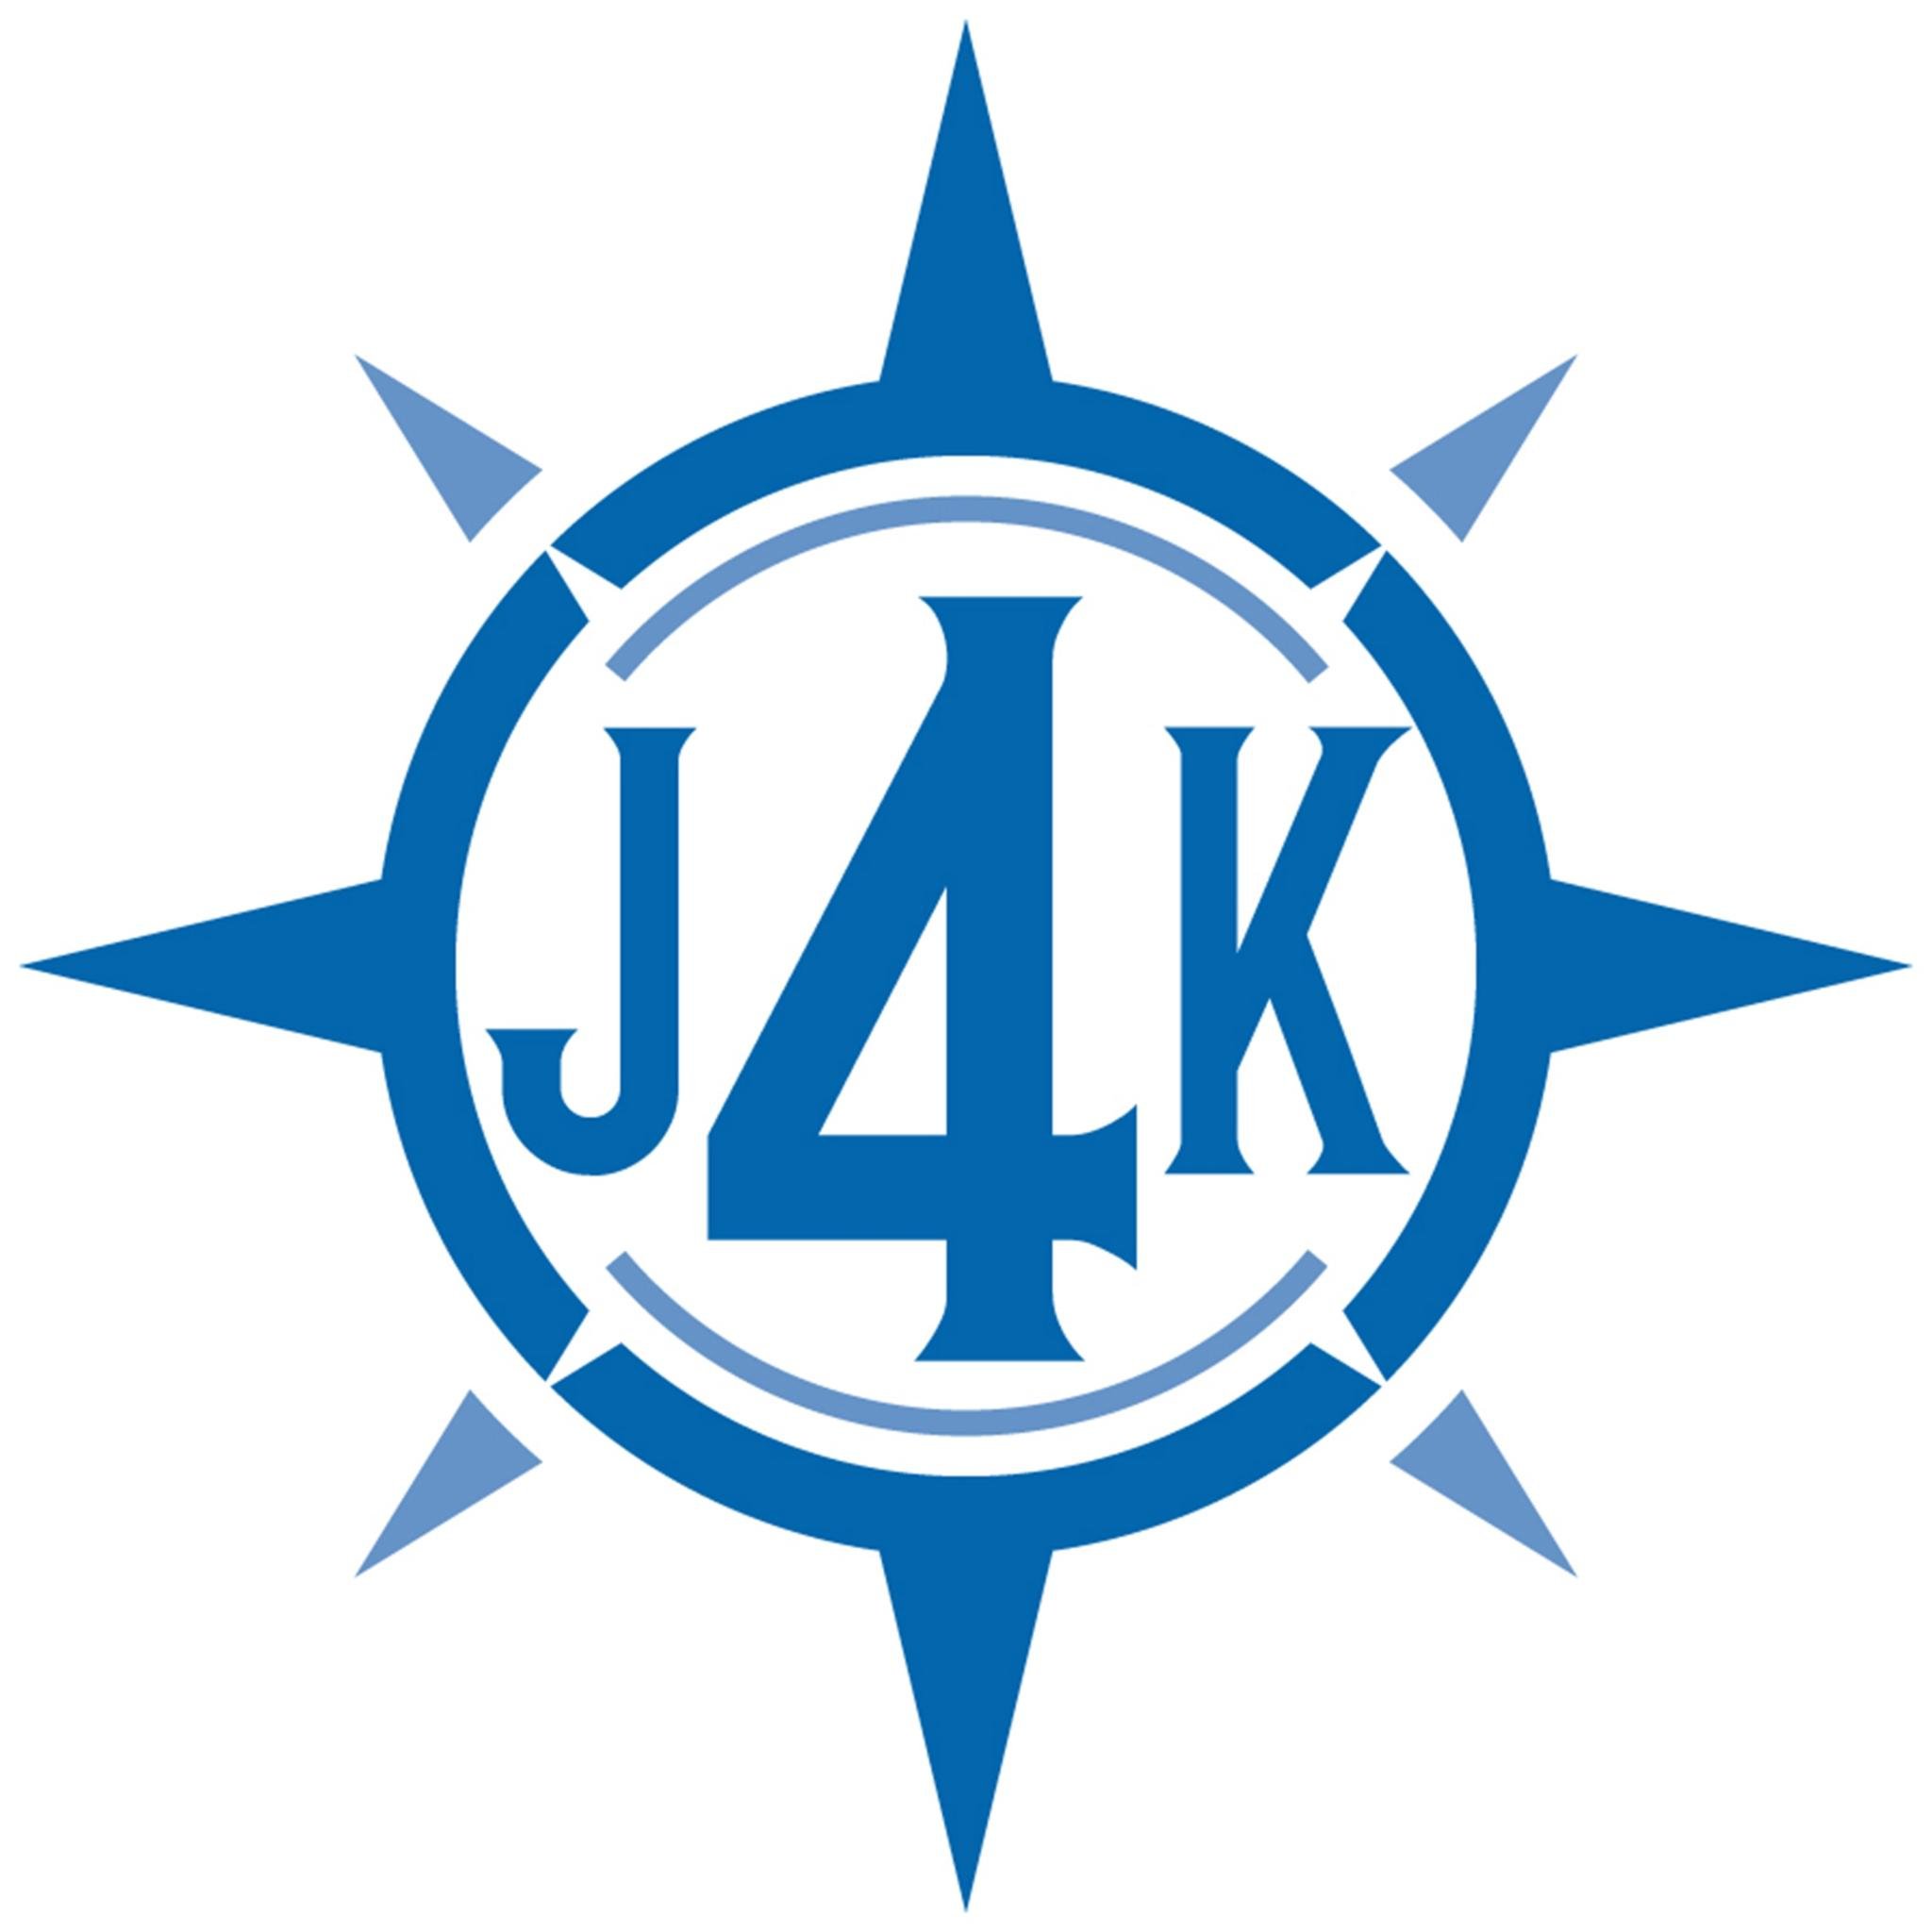 J4K is now the Commonhaus Foundation. J4K is an industry leading conf that combines the best of open source & MW communities for developing apps on Kubernetes.